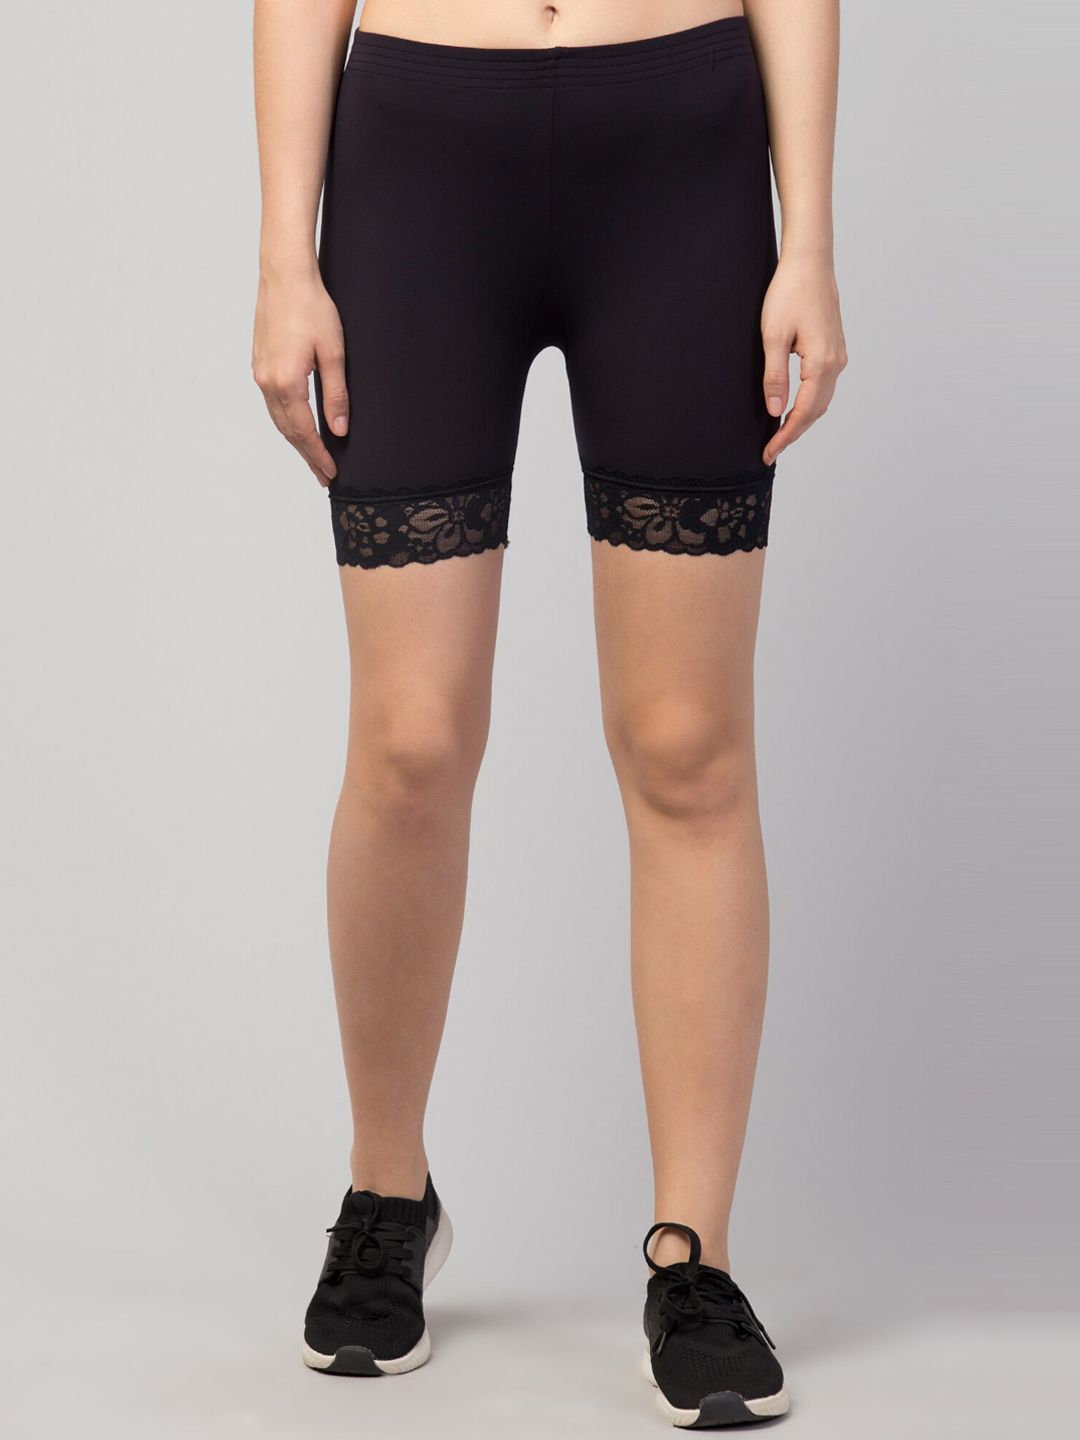 Apraa & Parma Women Black Skinny Fit Cycling Sports Shorts with e-Dry Technology Price in India